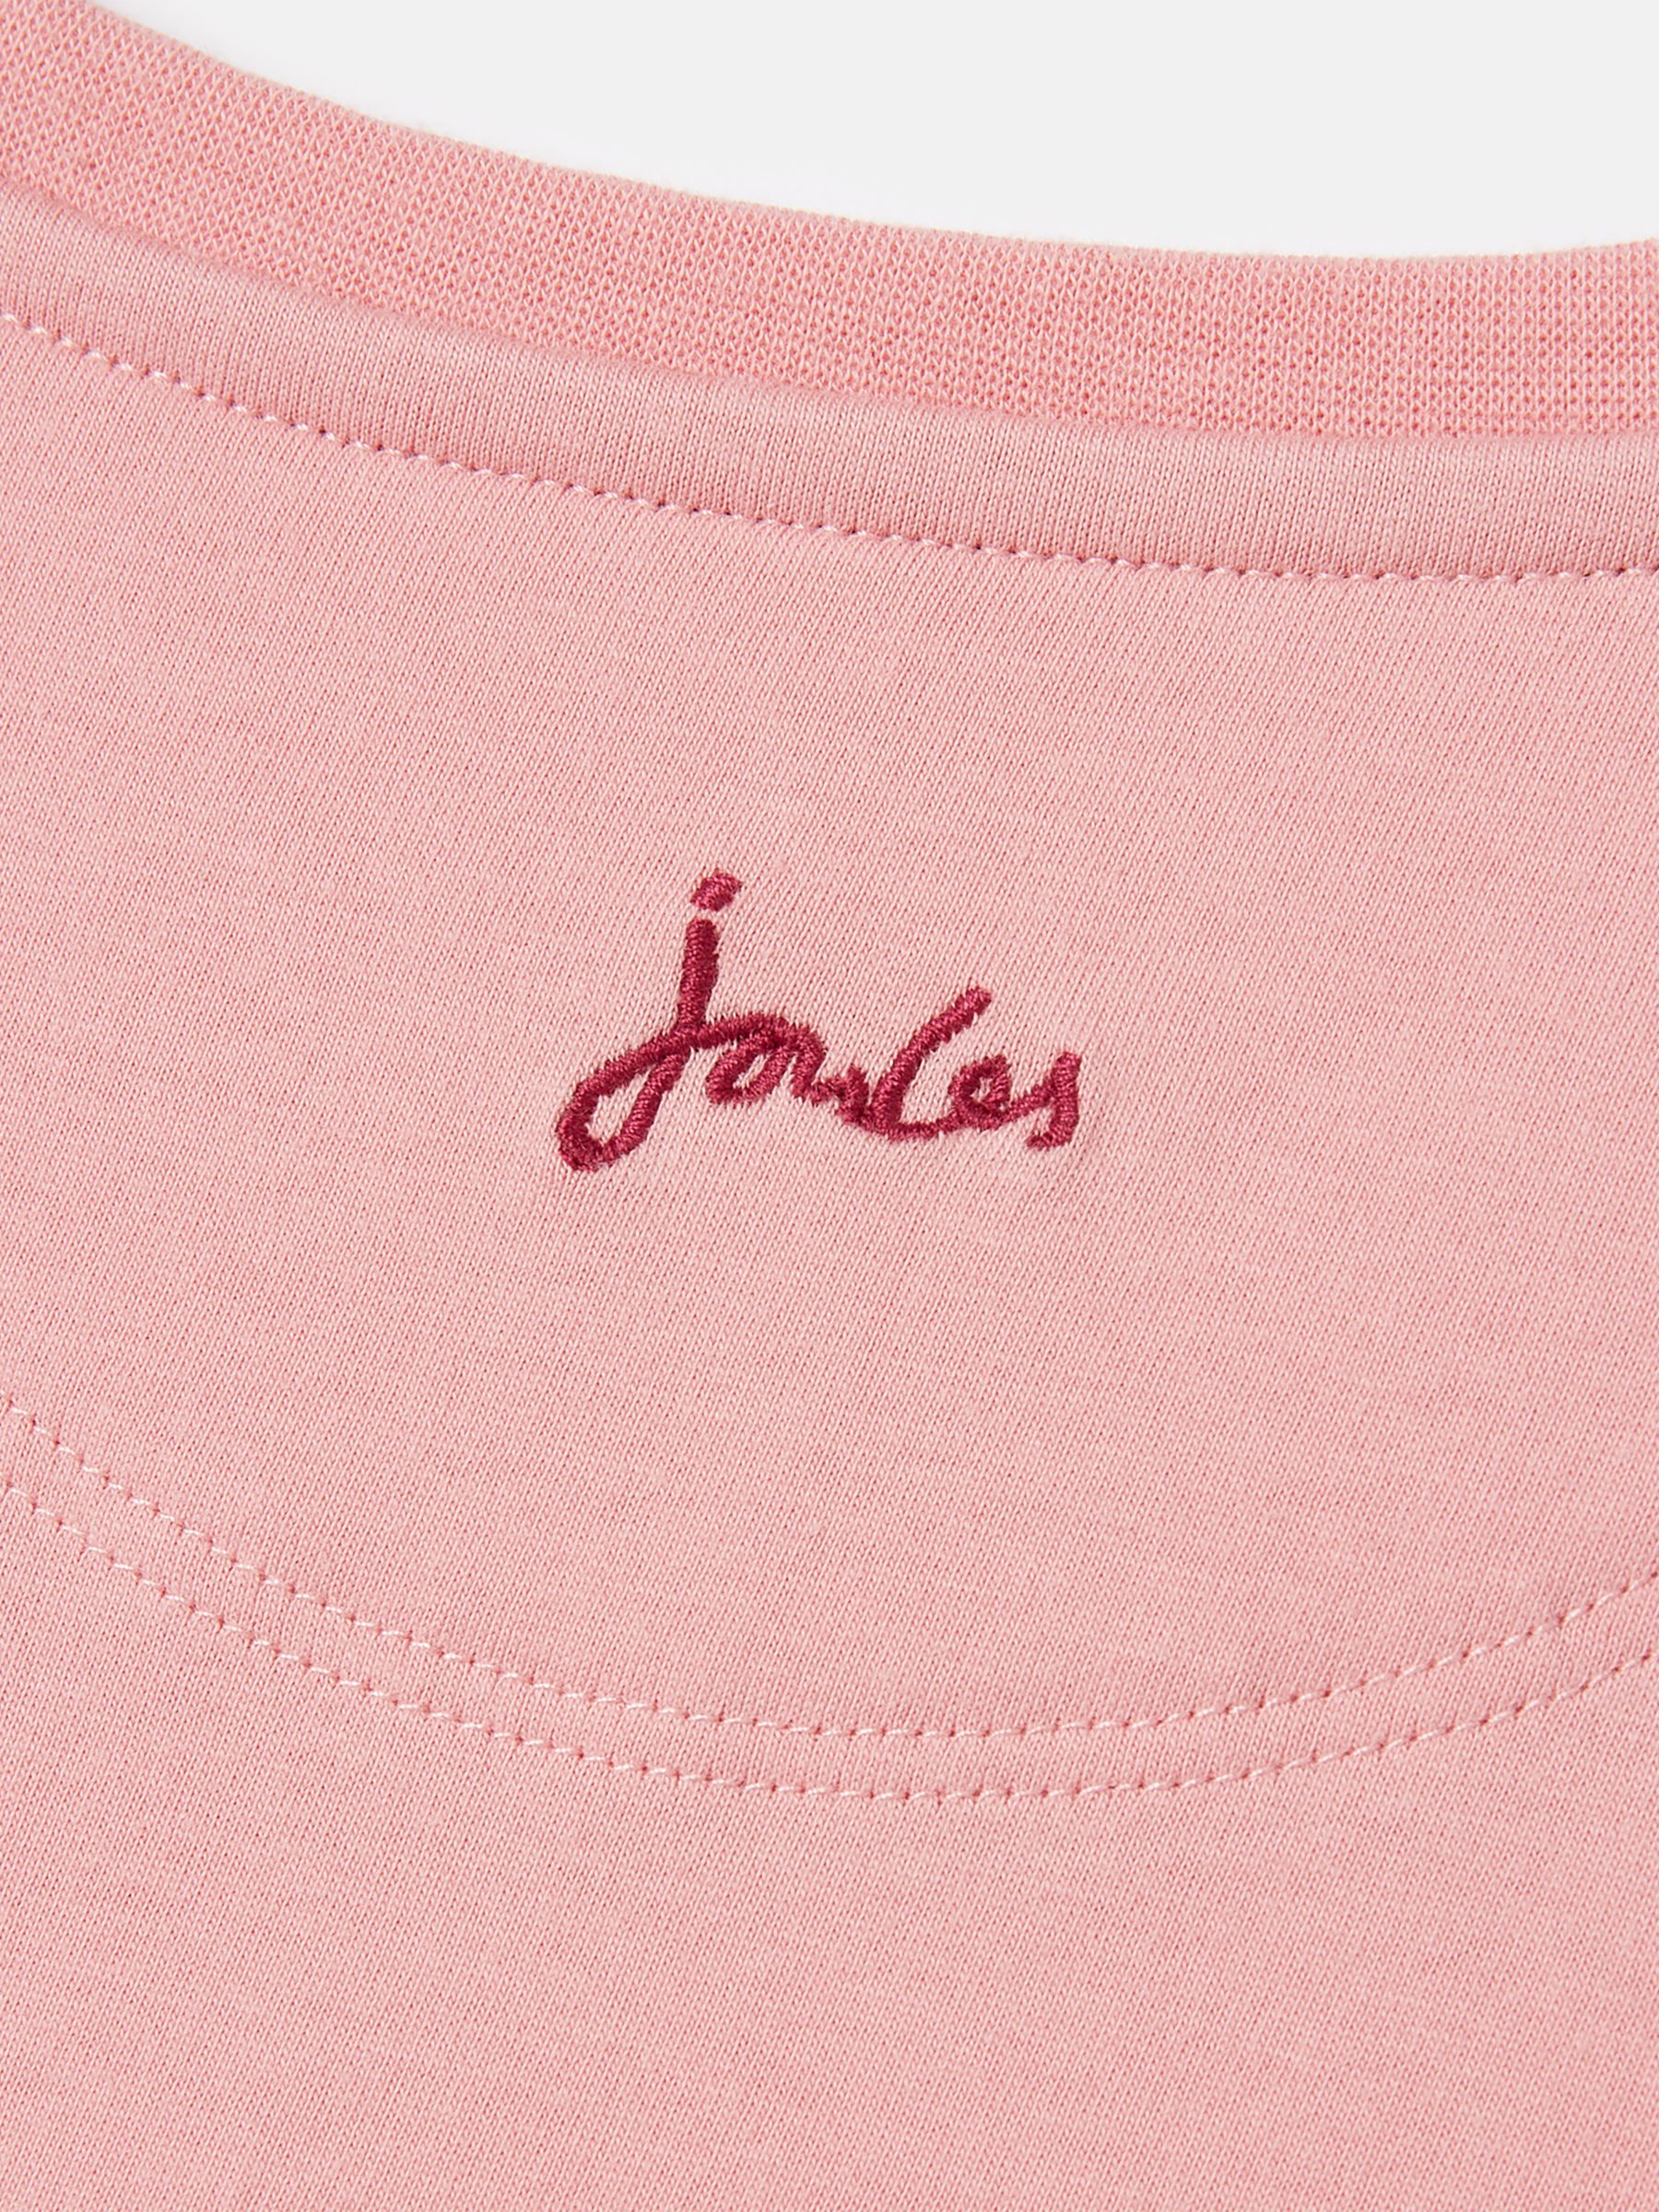 Buy Joules Ava Long Sleeve Artwork T-Shirt from the Joules online shop